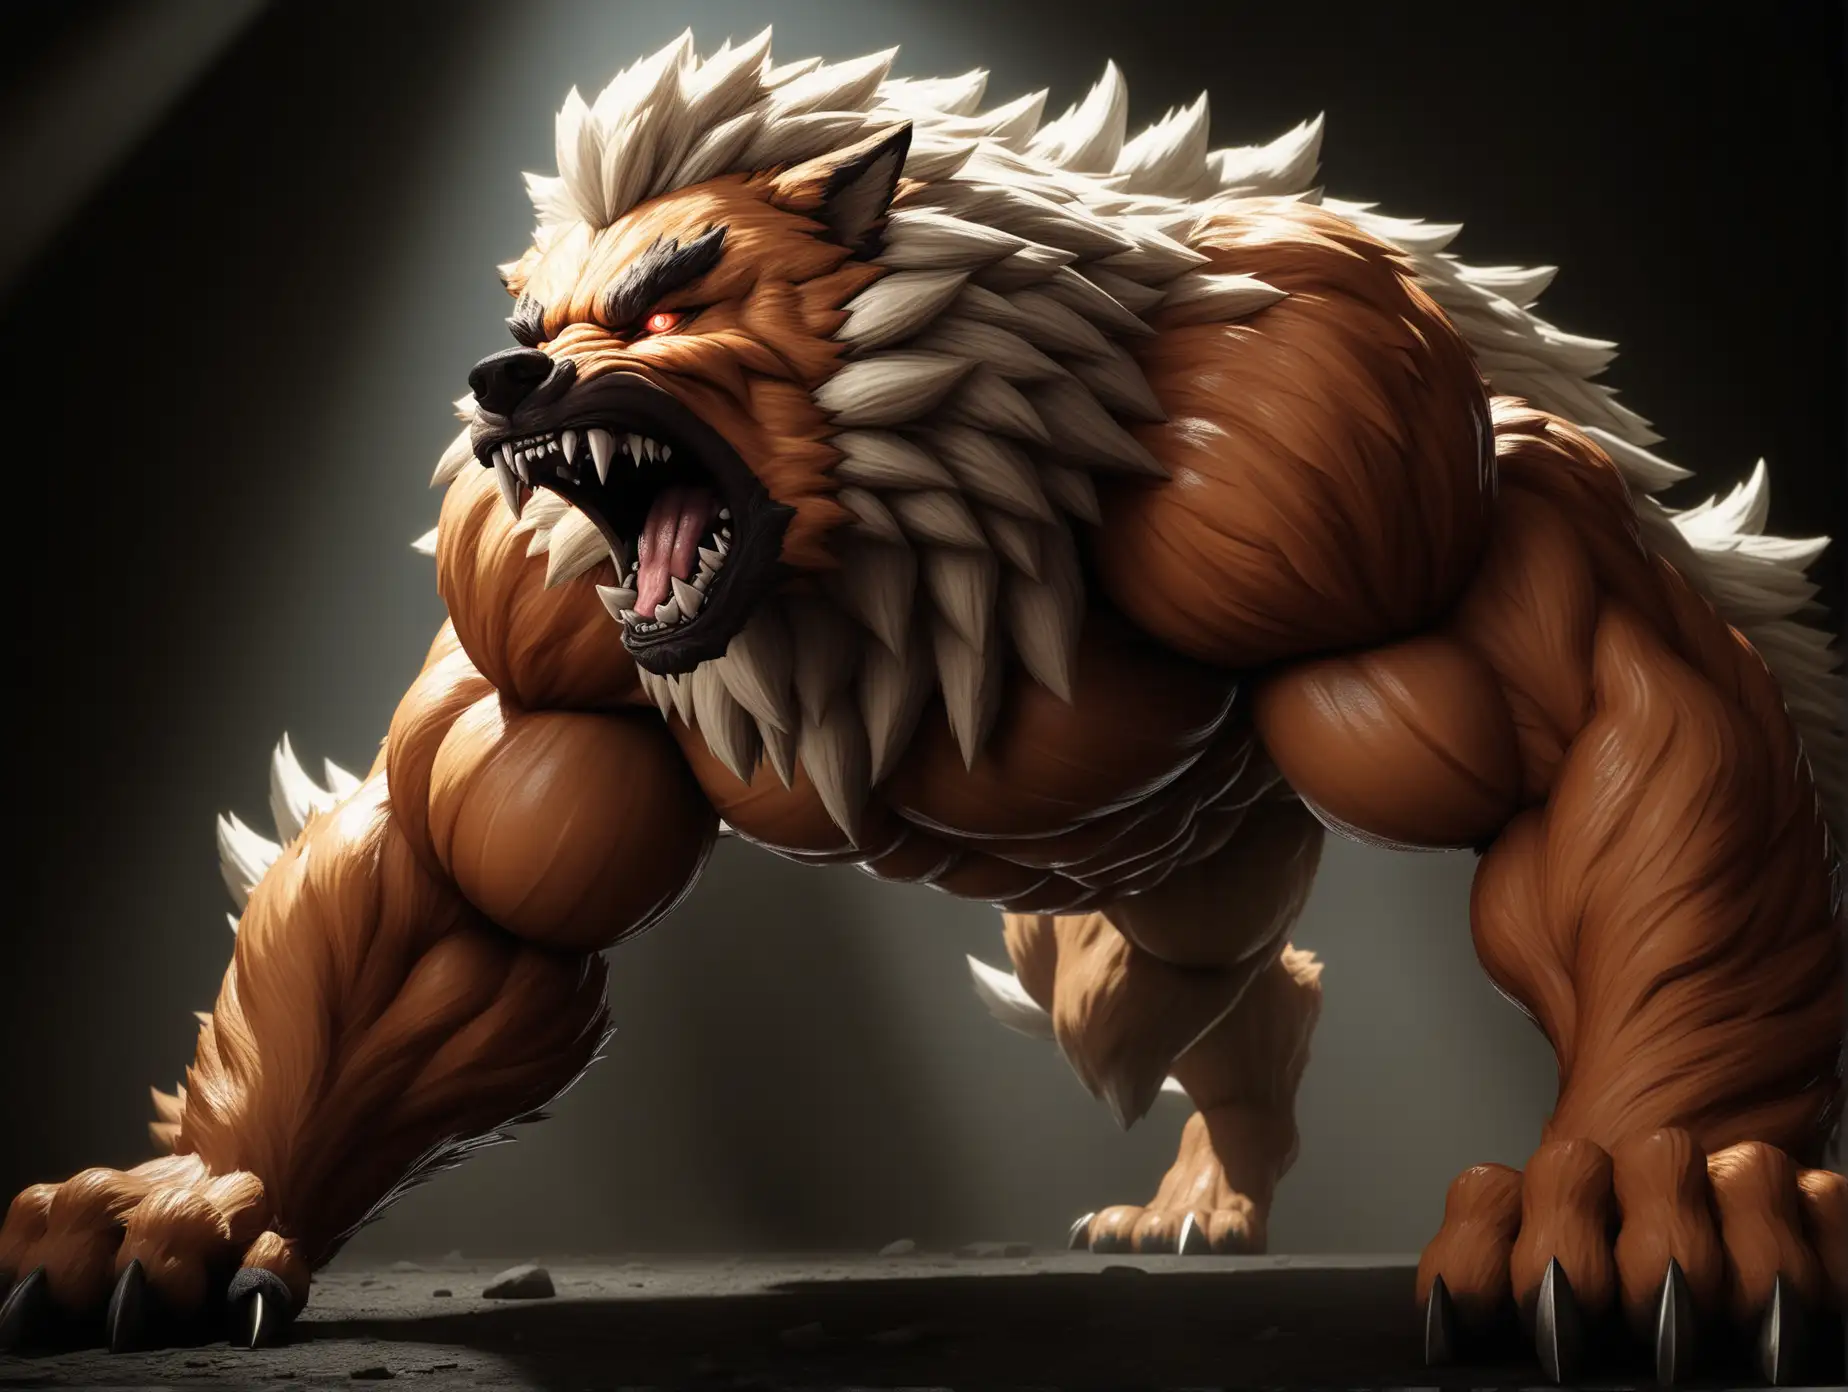 giant arcanine fox dog. highlighted fur. very muscular. very muscular arms. very muscular torso. cinematic lighting and cinematic shading. very long tongue. long saber tooth fangs. scary snarling. Ultra high definition. cinematic lighting and cinematic shading. very intricately and microscopically detailed.